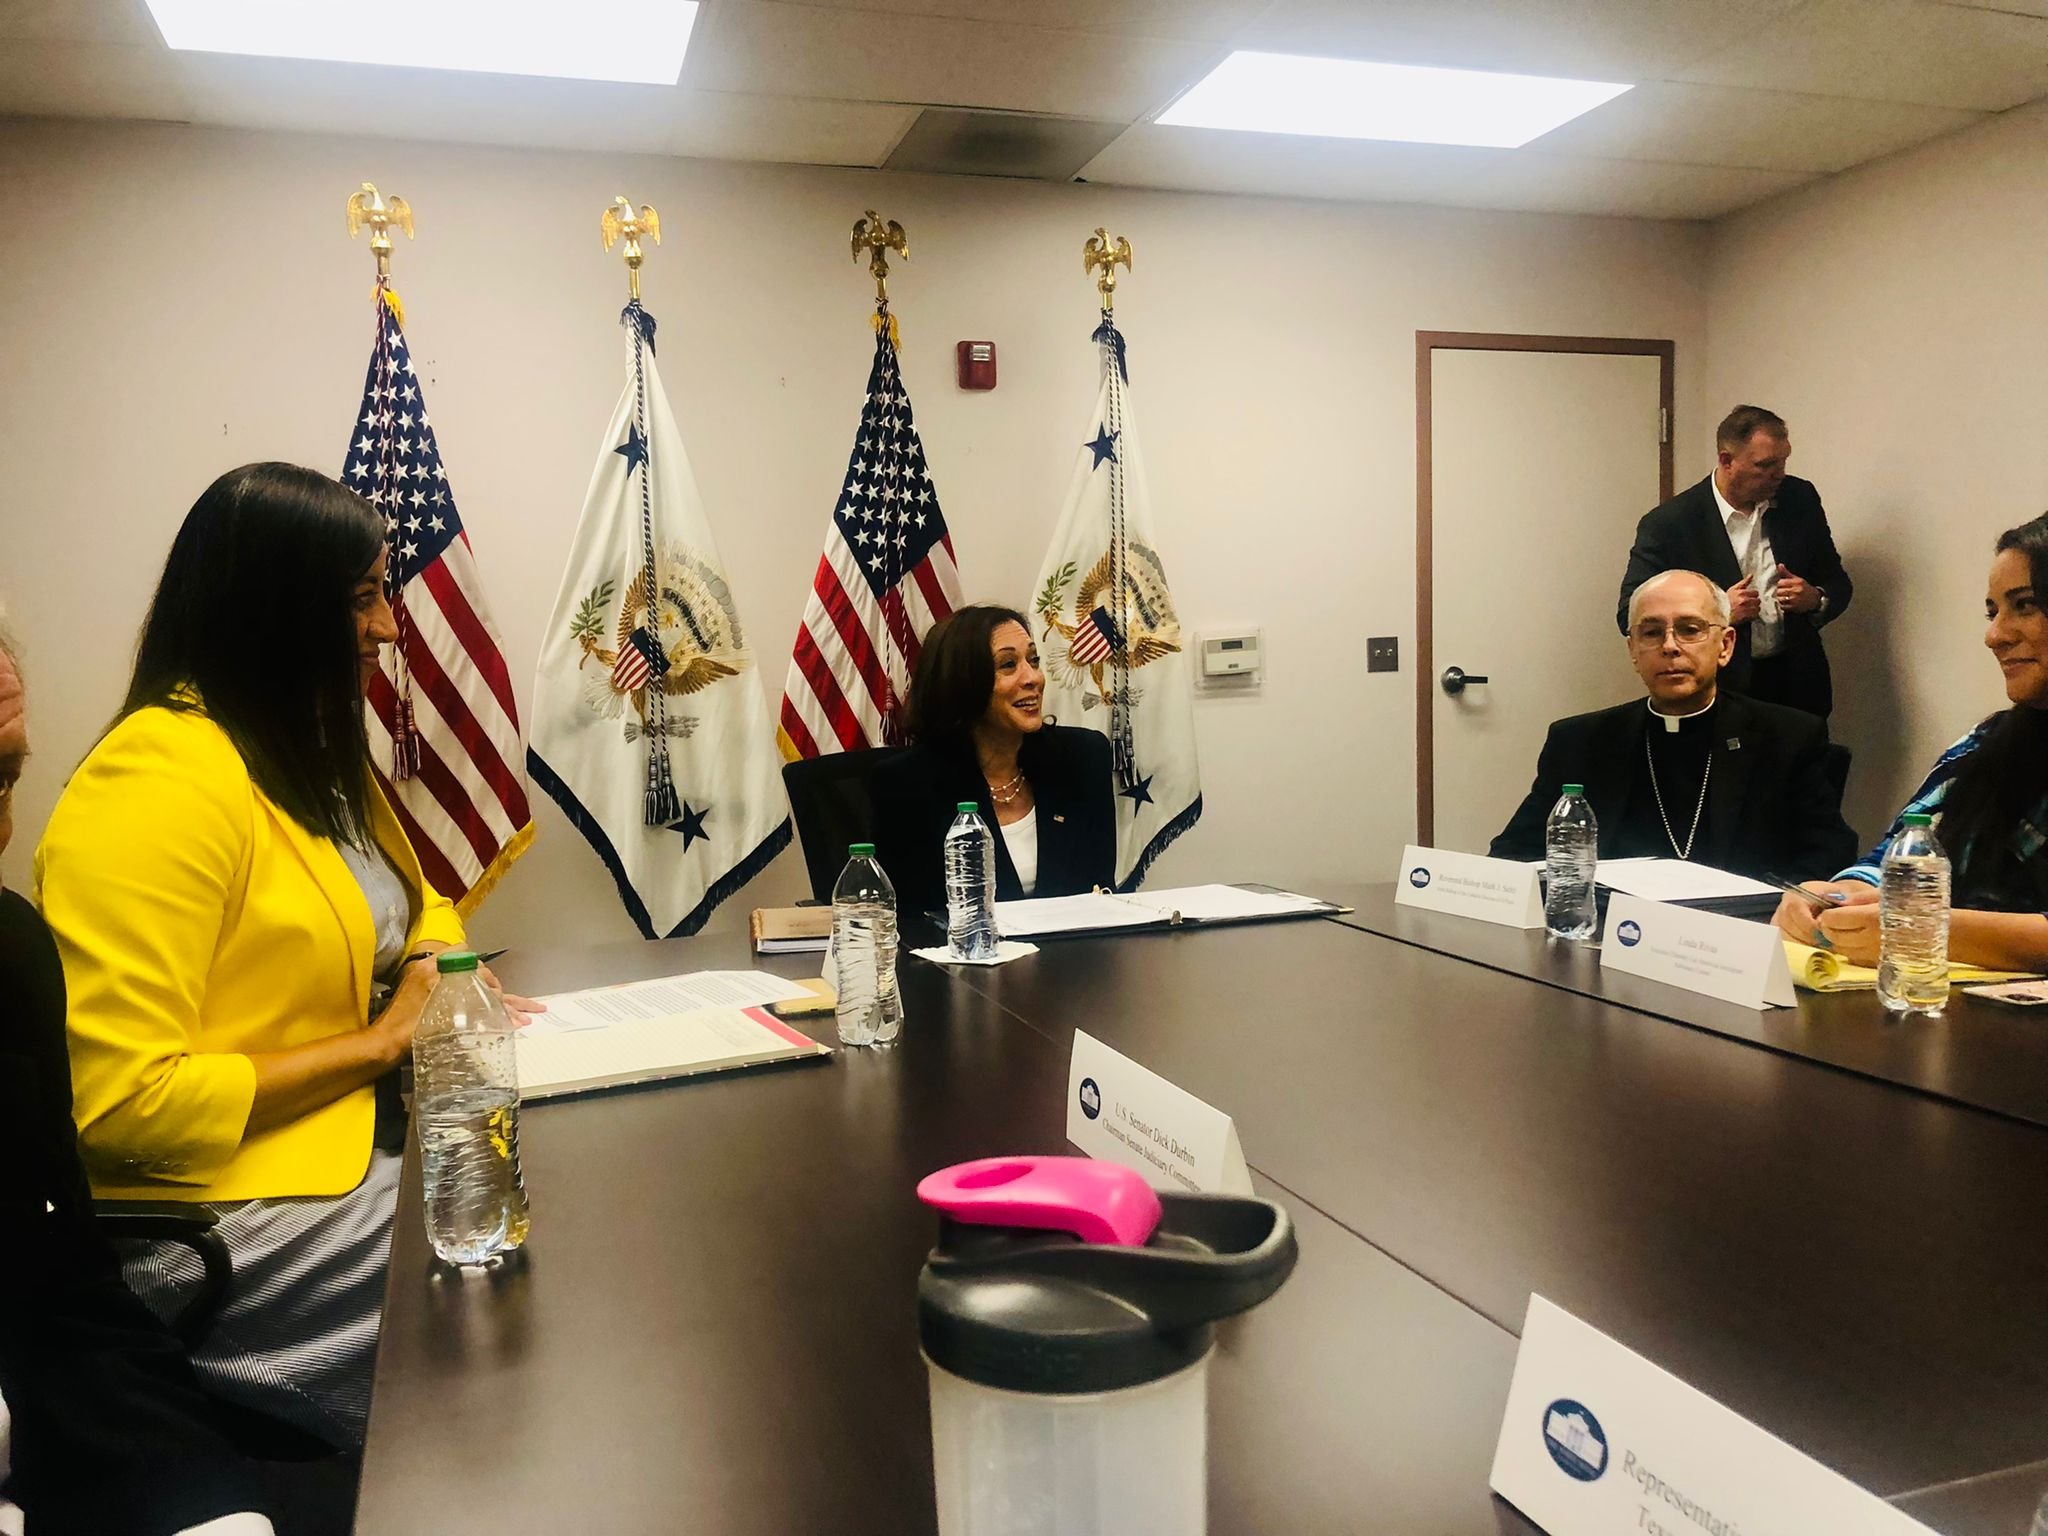 Bishop Mark J. Seitz of El Paso, Texas, meets with Vice President Kamala Harris in El Paso June 25, 2021, during her first trip to the border as vice president to talk about immigration. Harris traveled to a border point of entry and met with faith groups